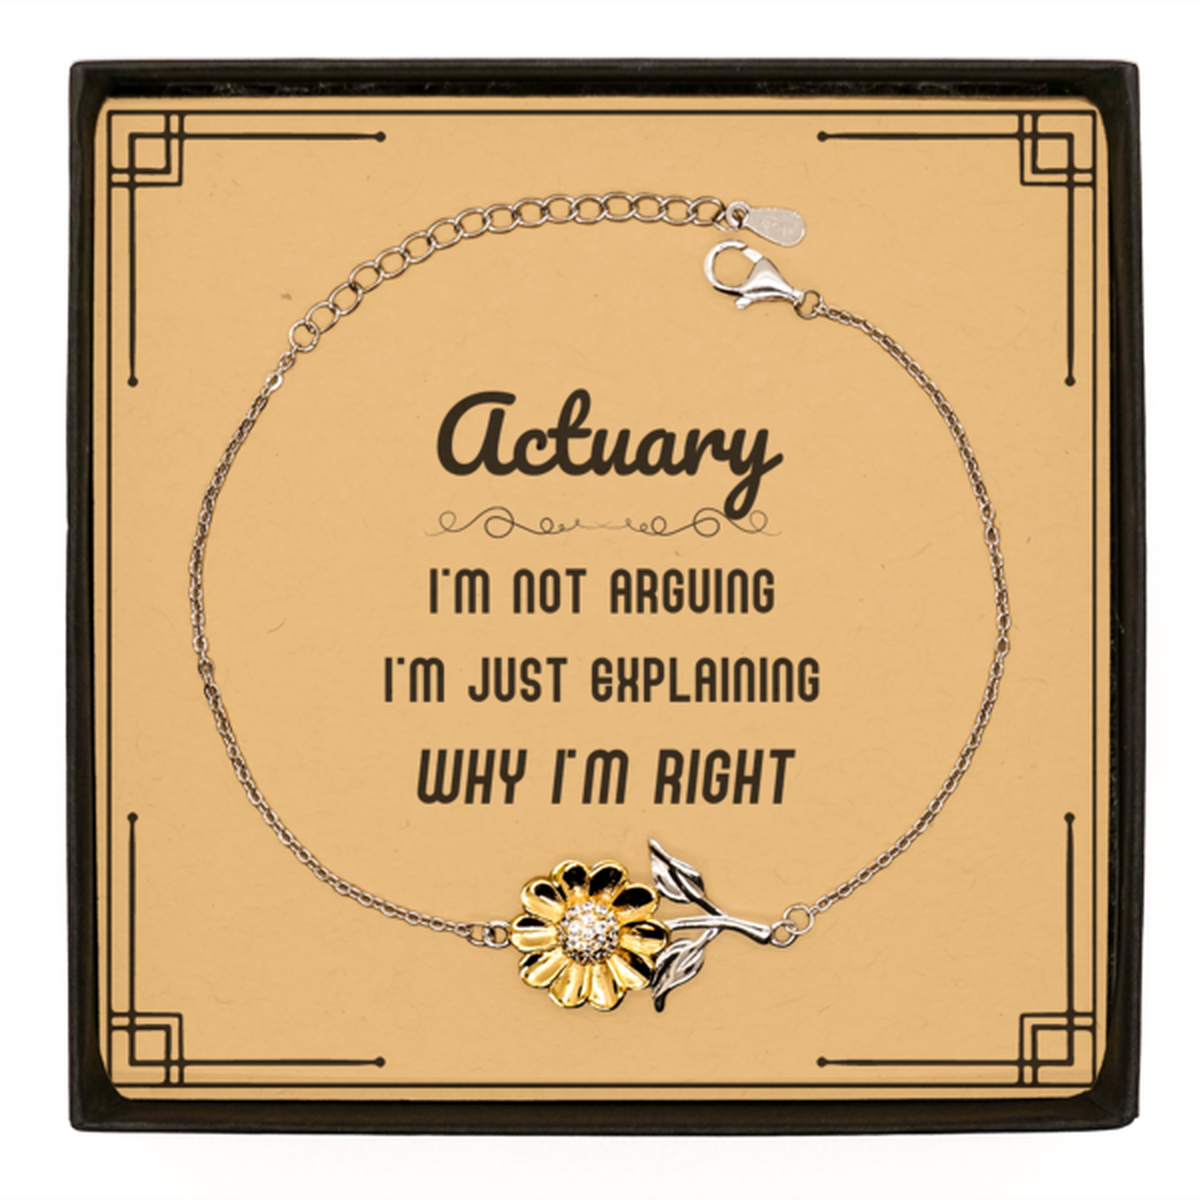 Actuary I'm not Arguing. I'm Just Explaining Why I'm RIGHT Sunflower Bracelet, Funny Saying Quote Actuary Gifts For Actuary Message Card Graduation Birthday Christmas Gifts for Men Women Coworker